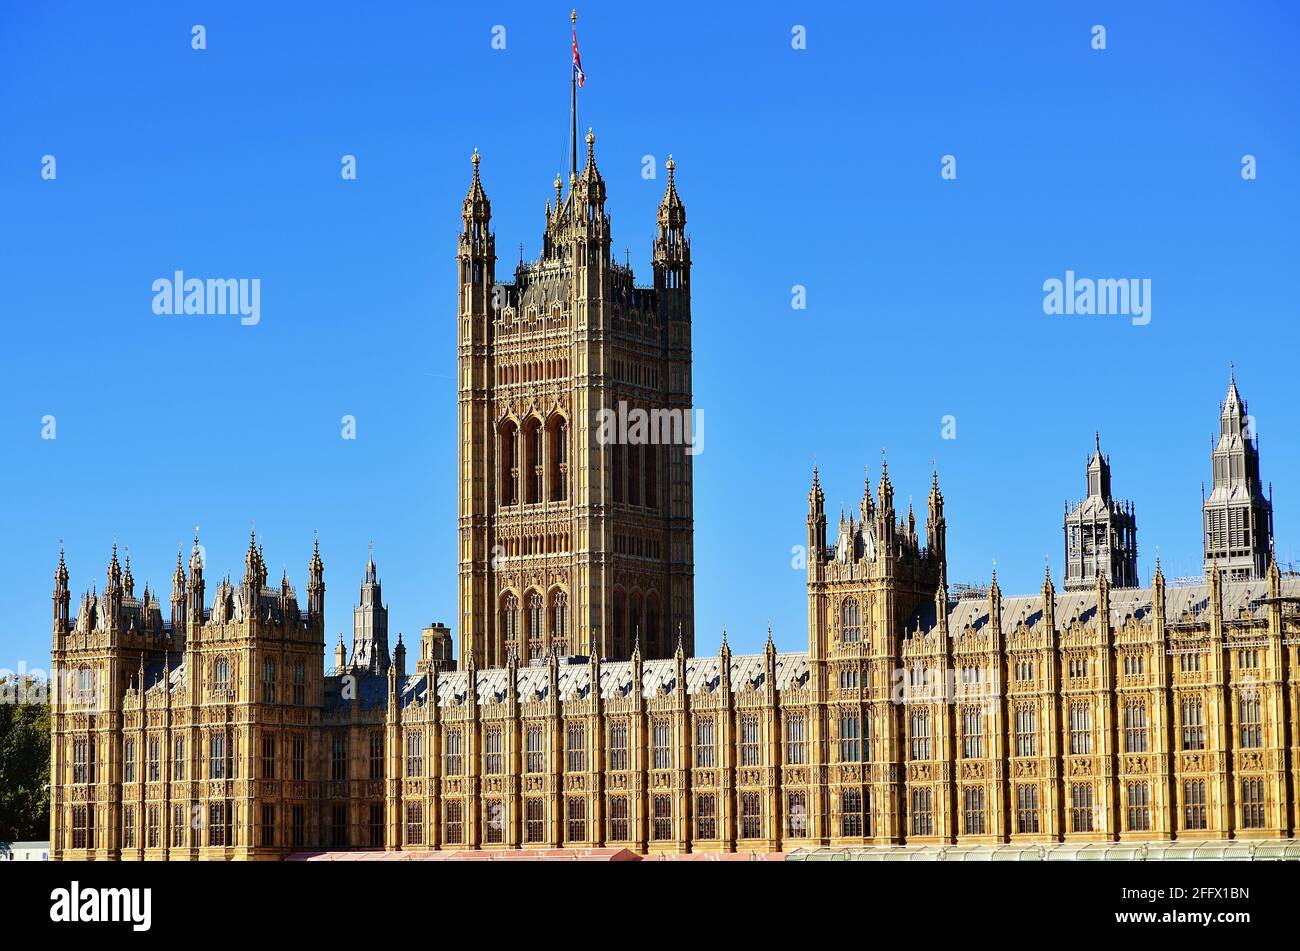 London, England, United Kingdom. Victoria Tower and the Houses of Parliament. Victoria Tower sits at the House of Lords end of the structure. Stock Photo